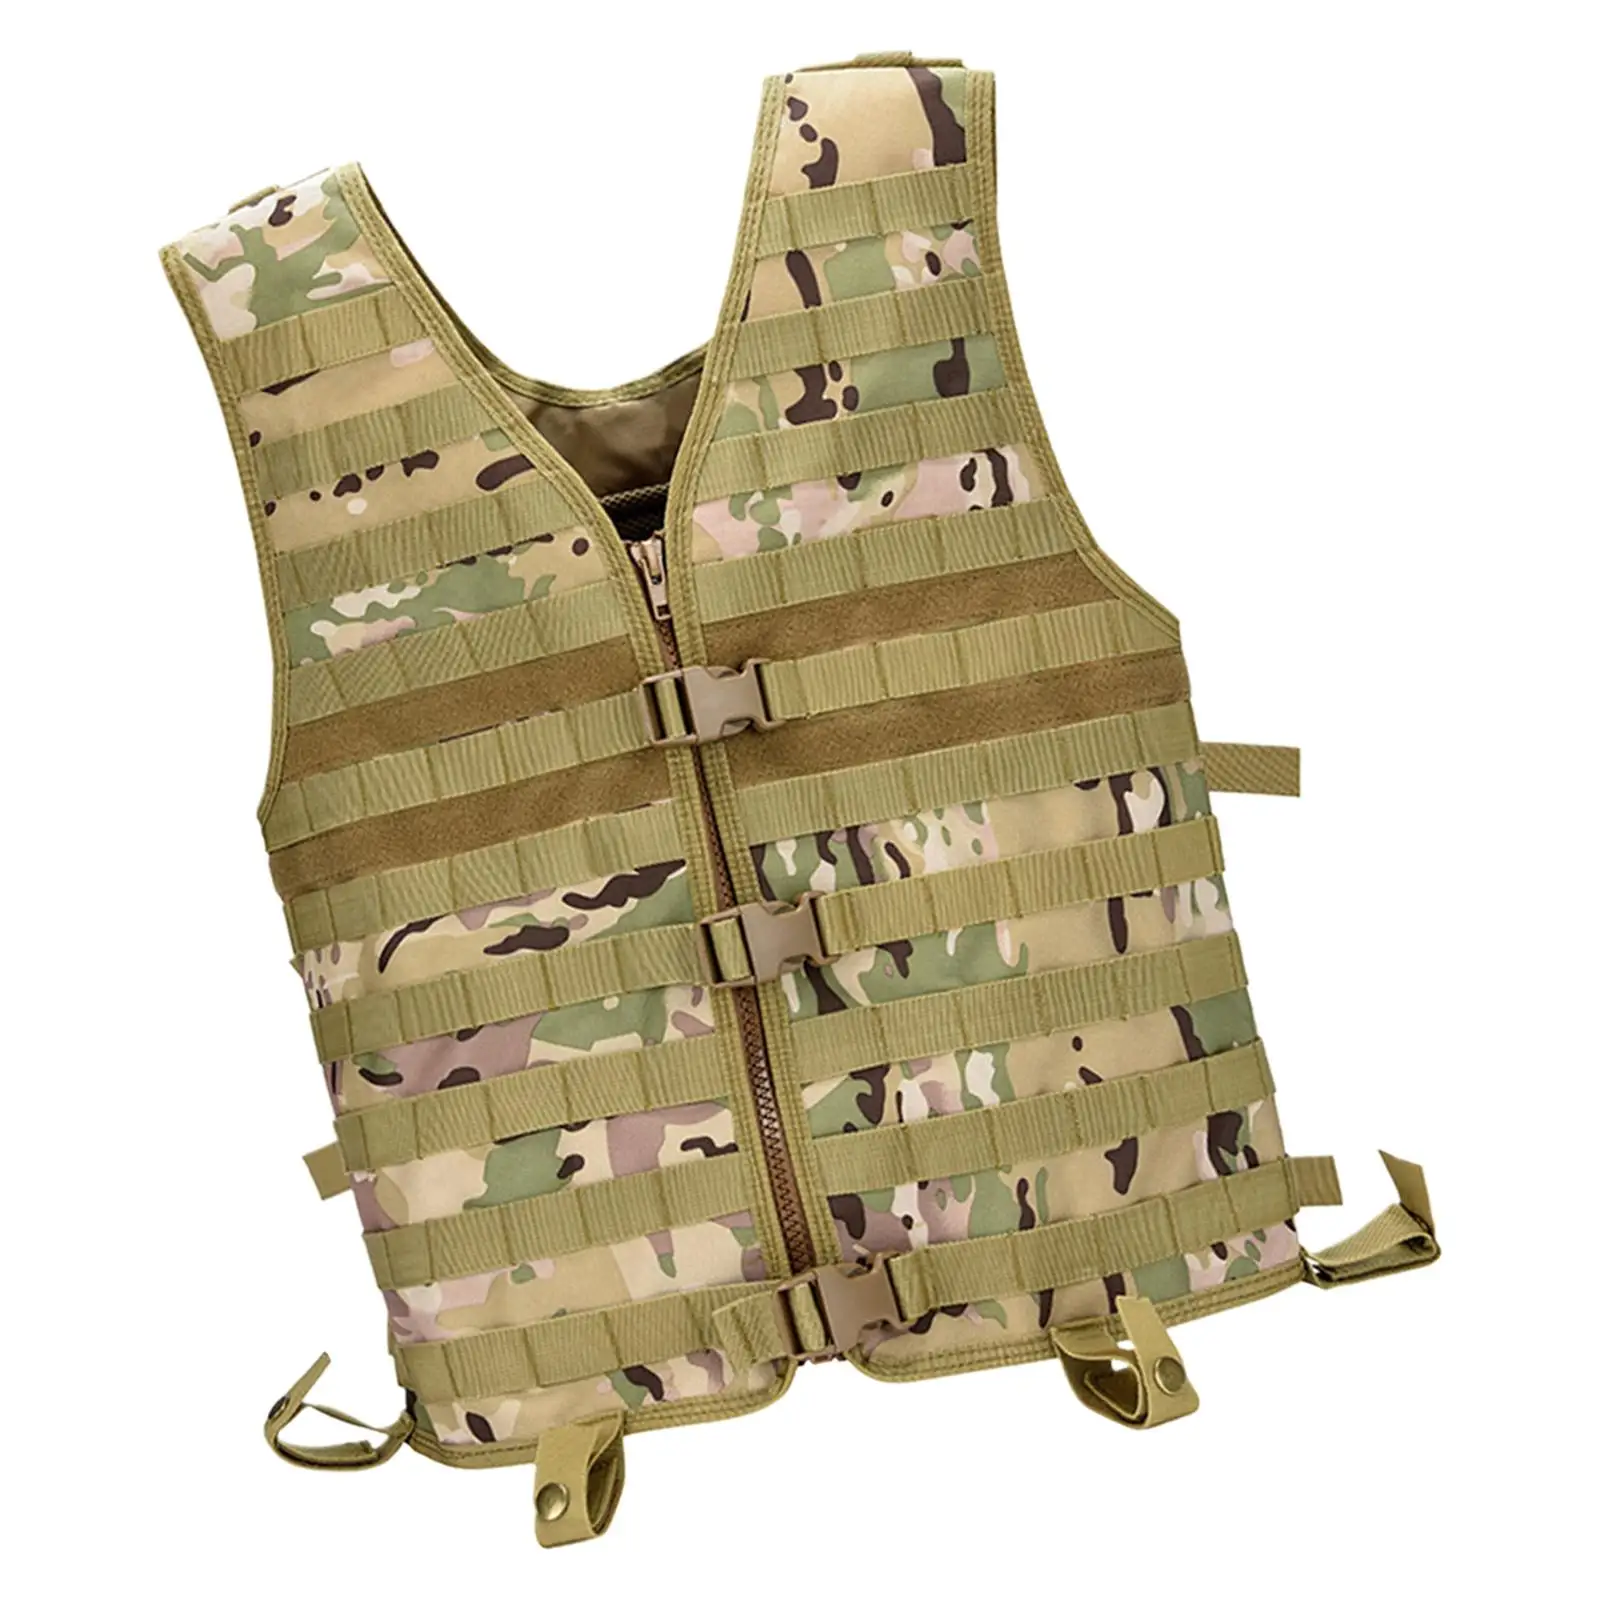 Outdoor Vest, Breathable Vest for Training Field Operations and Camping Hunting Fishing Hiking Equipment Shrink Belt